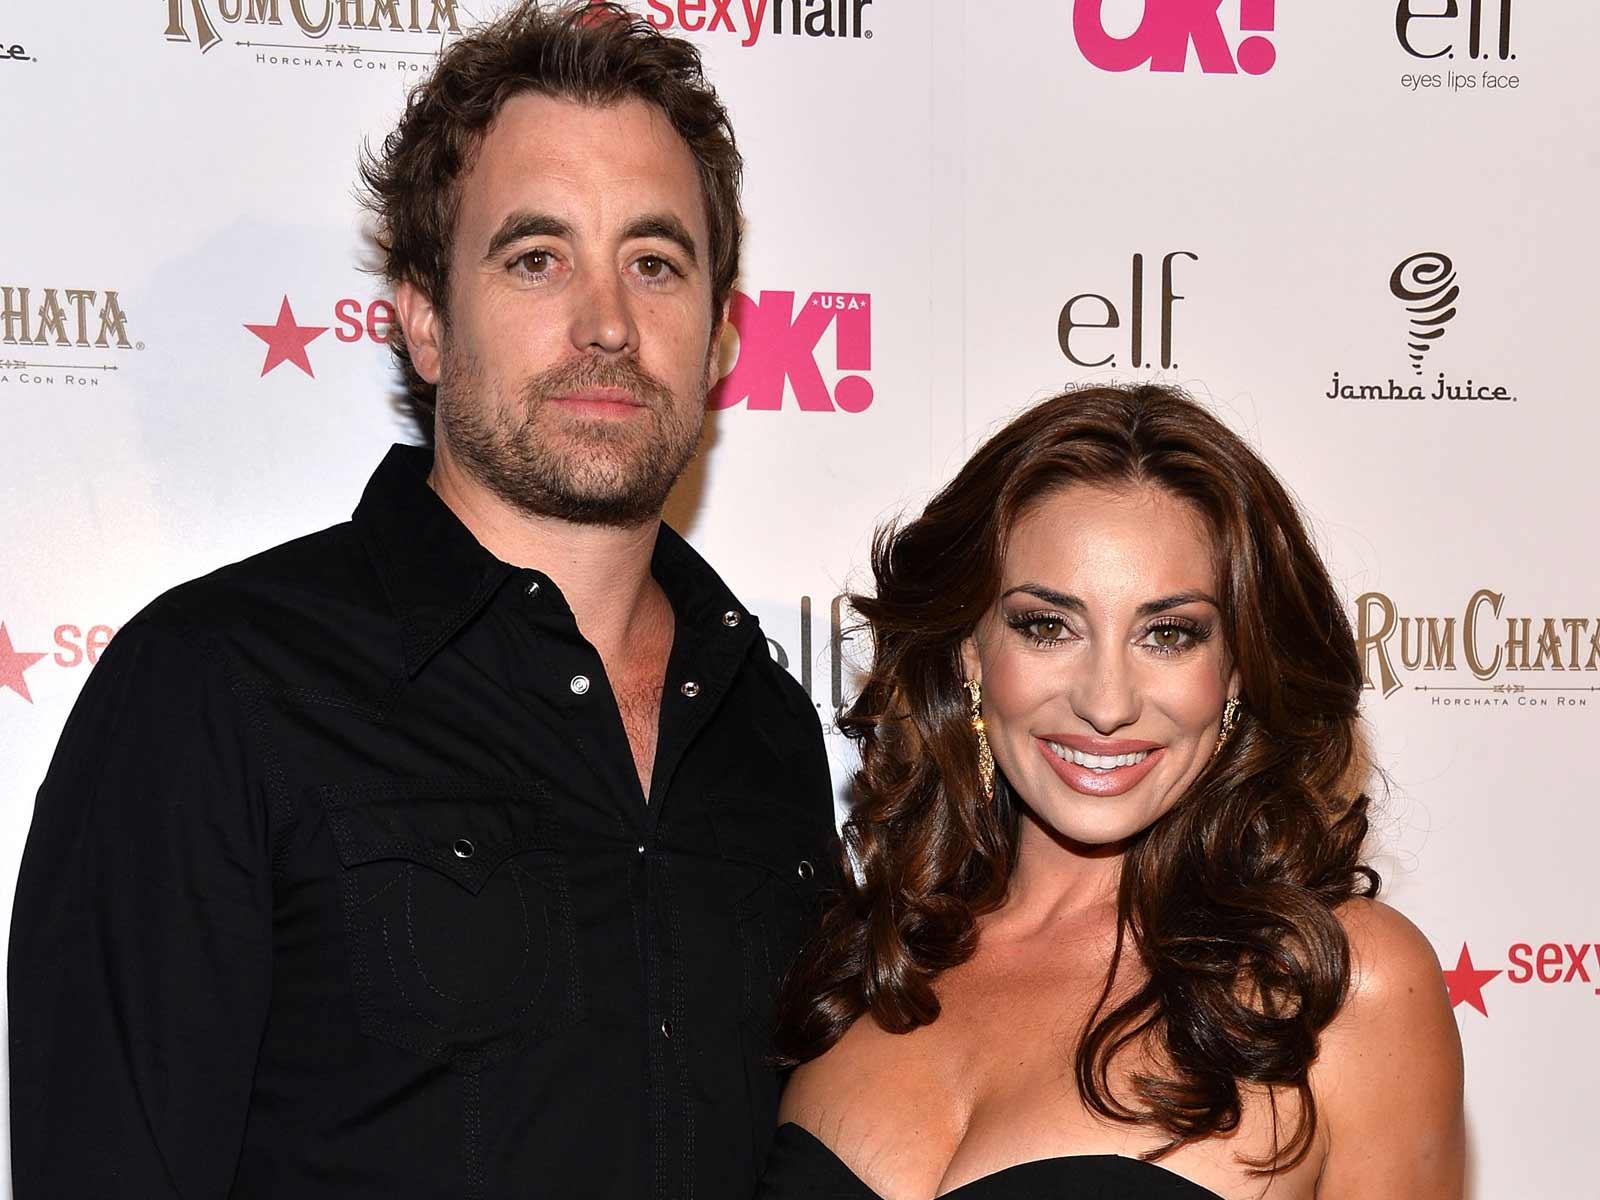 Ex-‘RHOC’ Star Lizzie Rovsek Finally Serves Husband with Divorce Papers After Hinting at Reconciliation